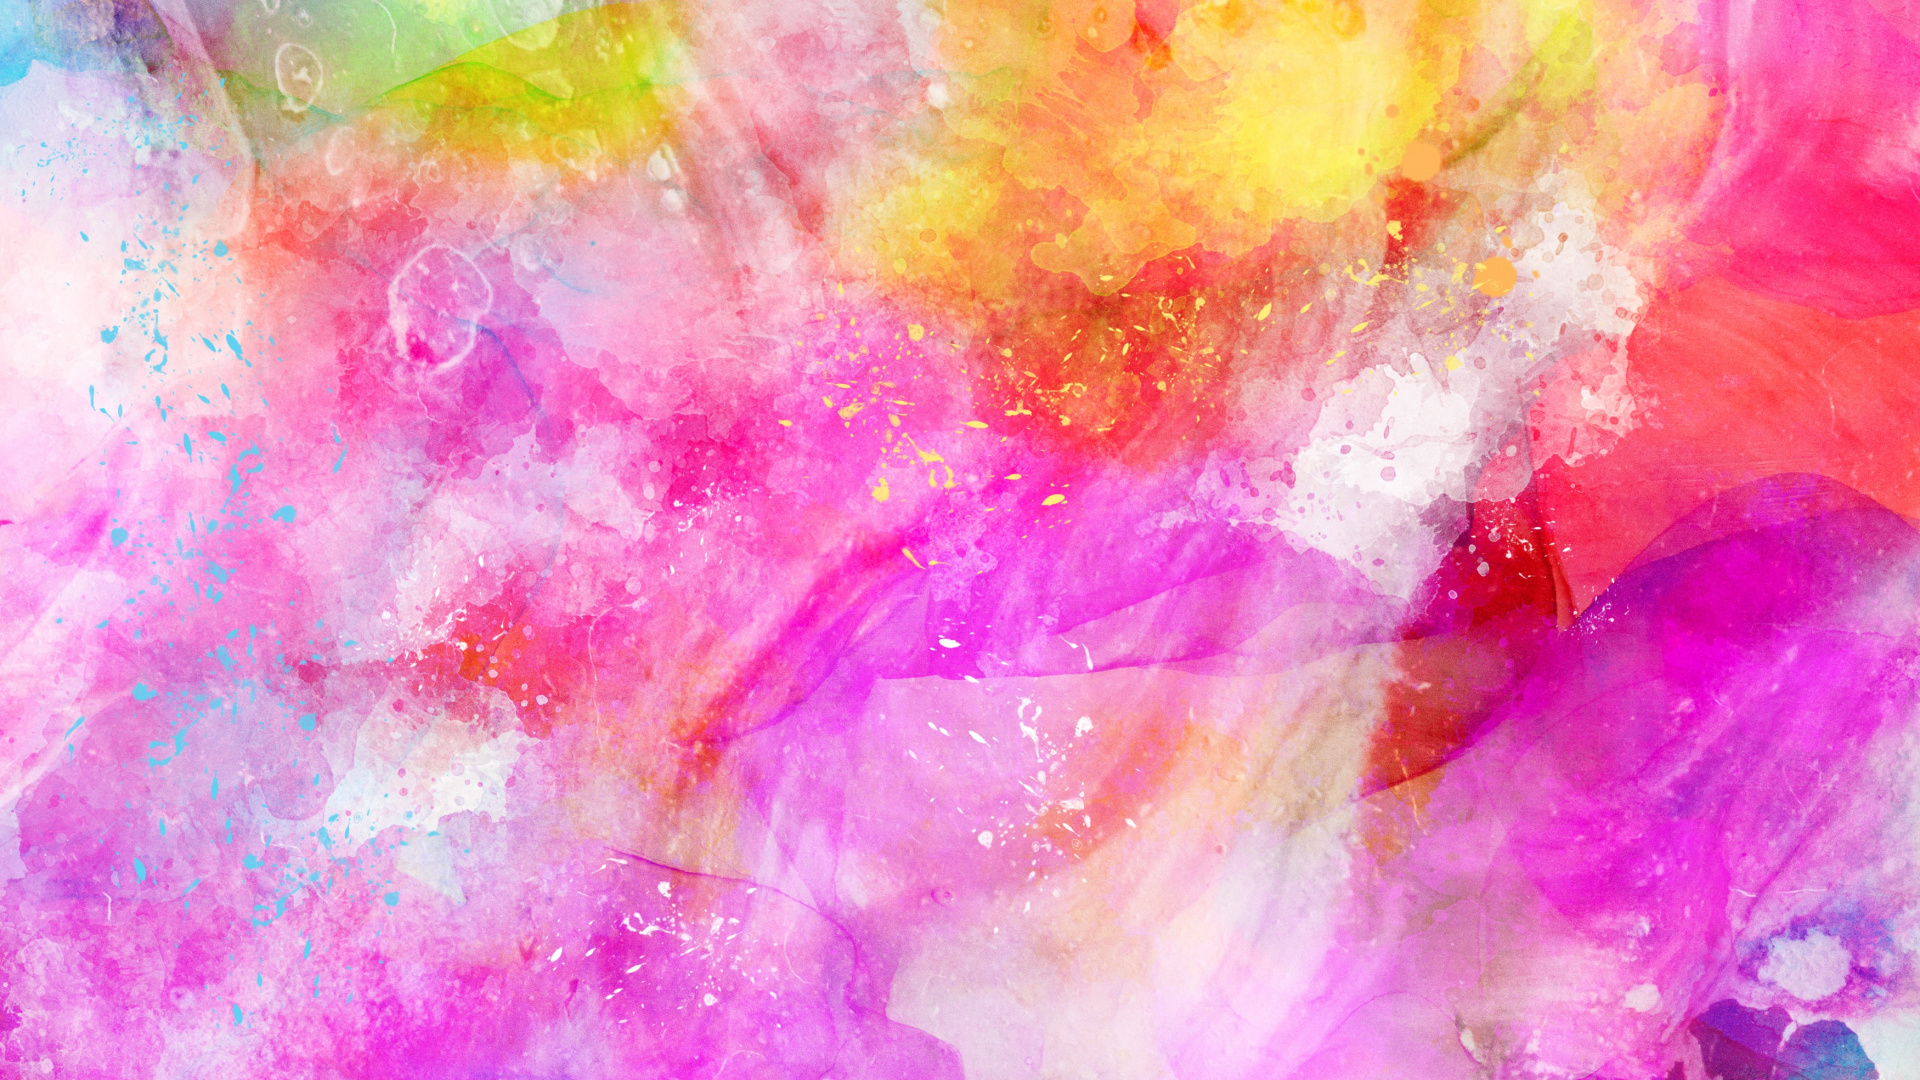 Download Pink and yellow, watercolor art wallpaper, 1920x Full HD, HDTV, FHD, 1080p